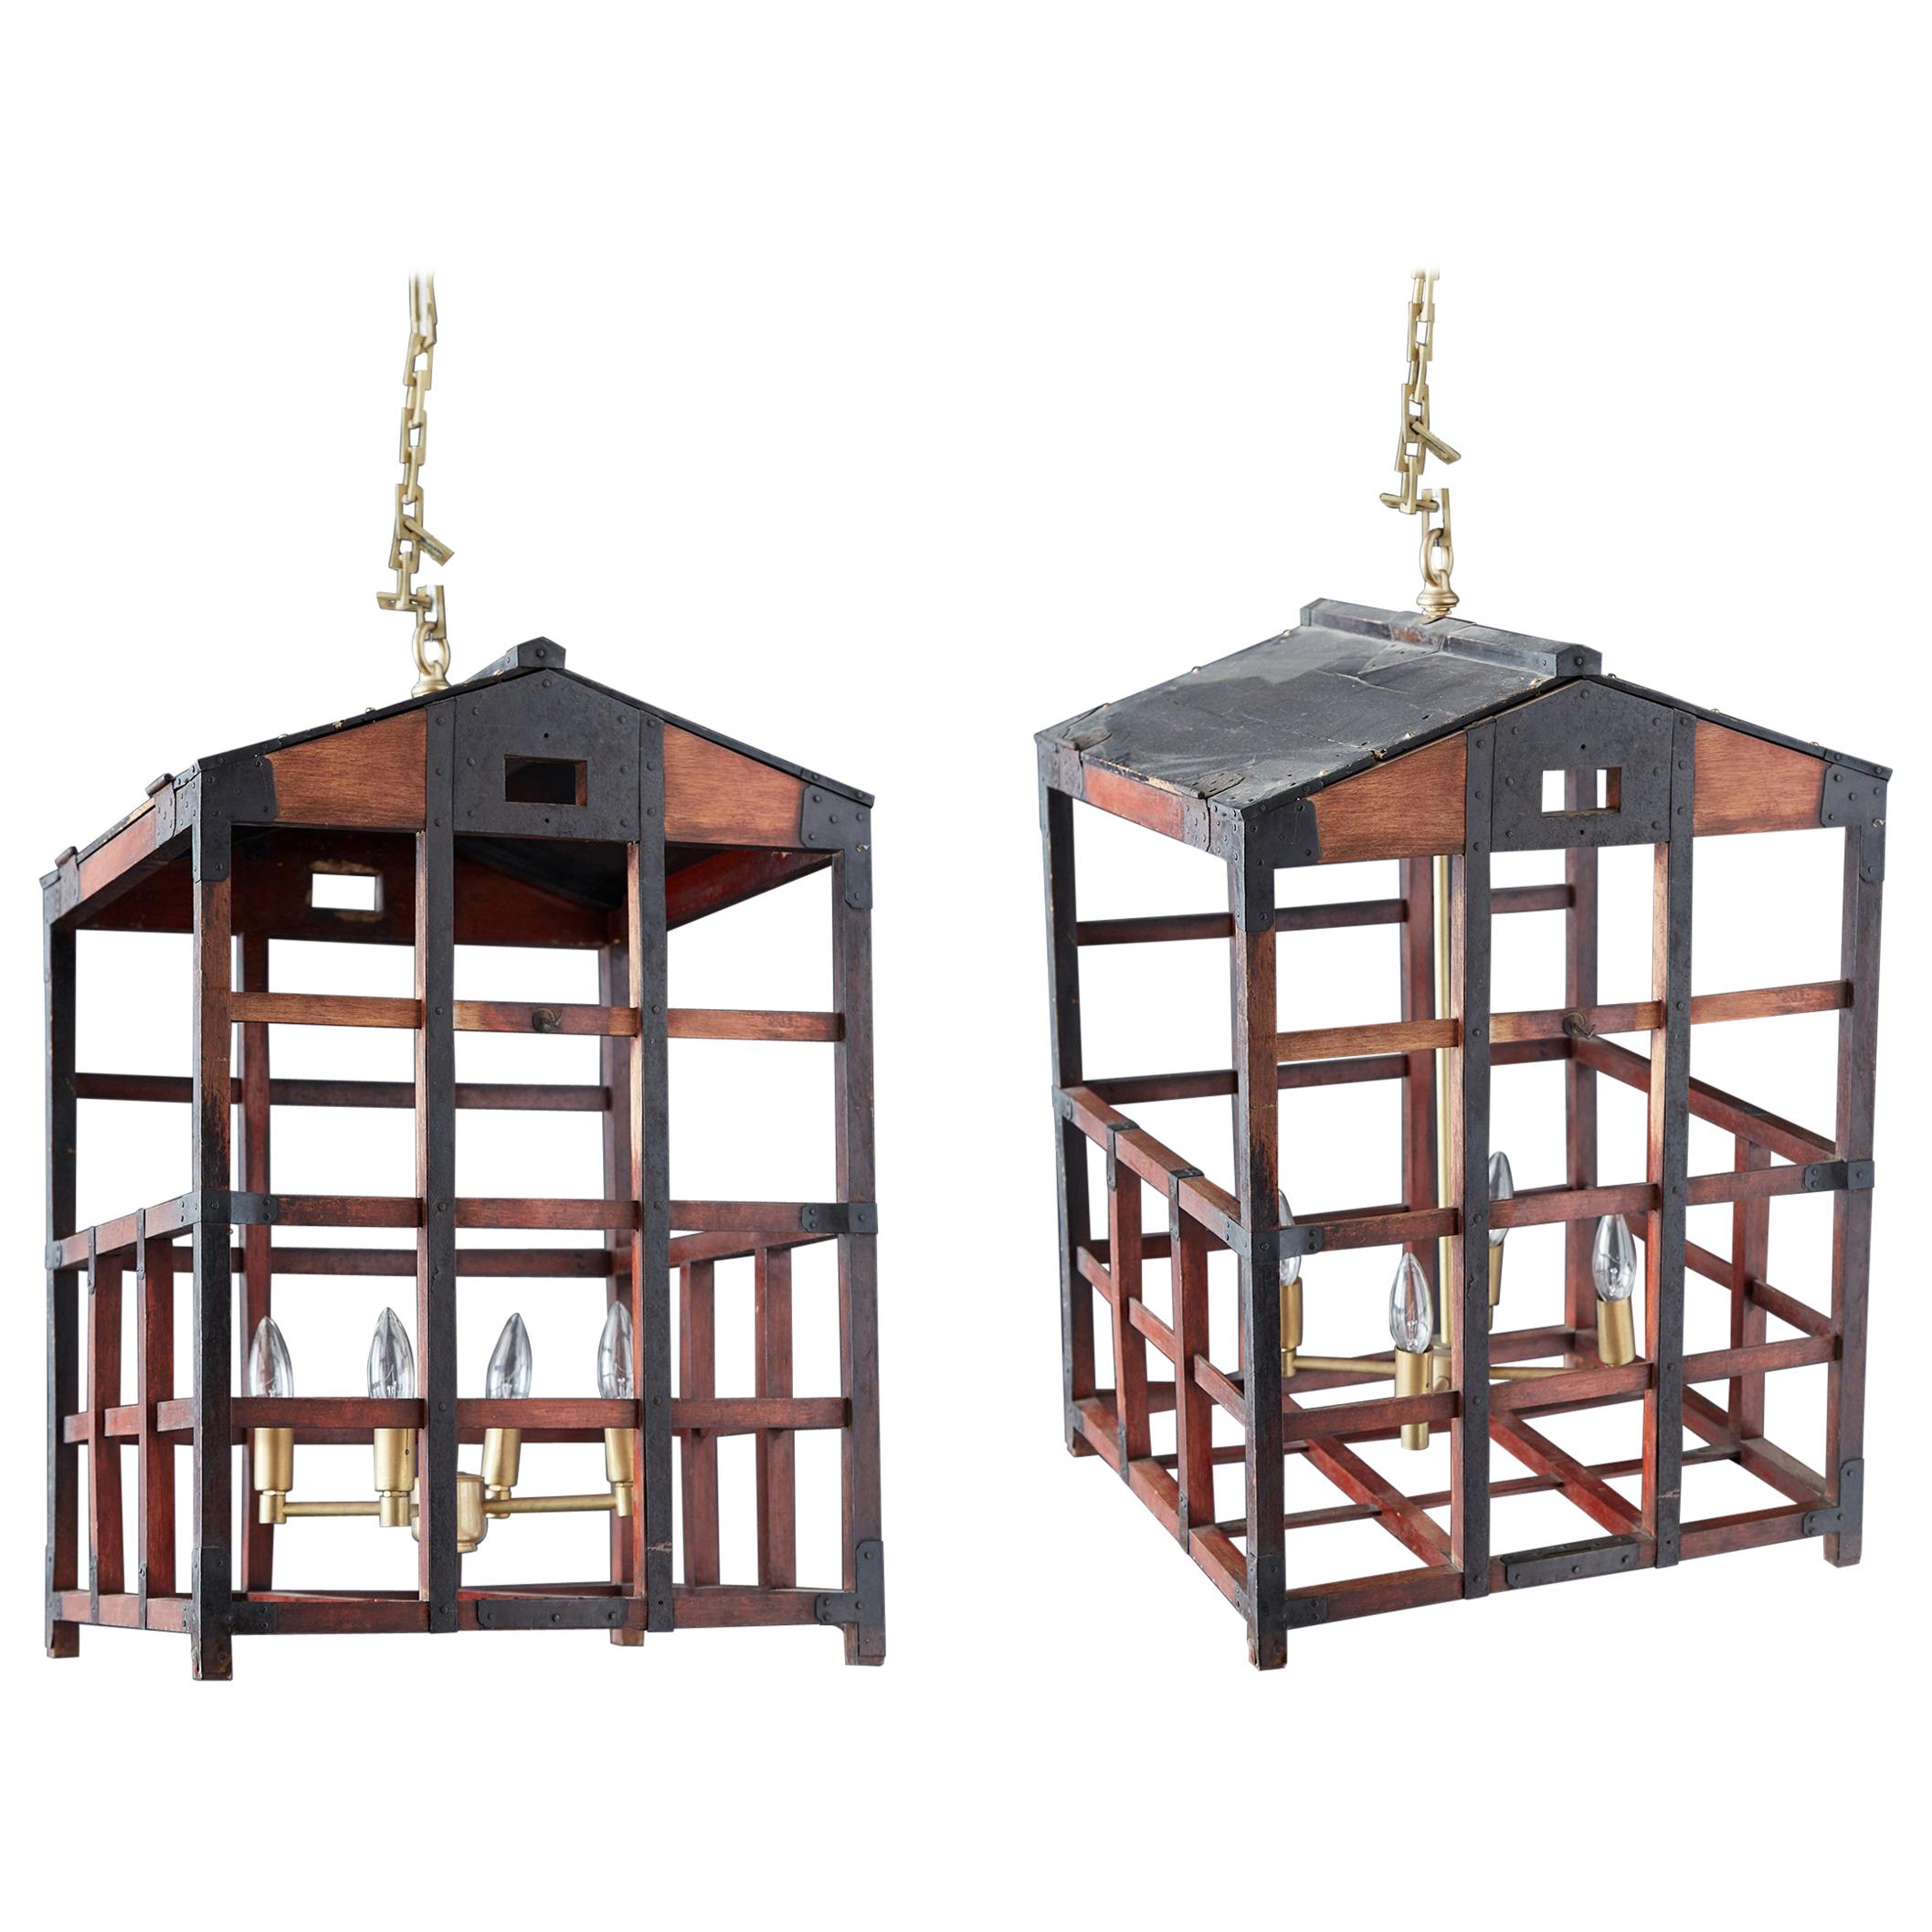 Japanese Tansu Style Wooden Crate Cage Chandeliers For Sale